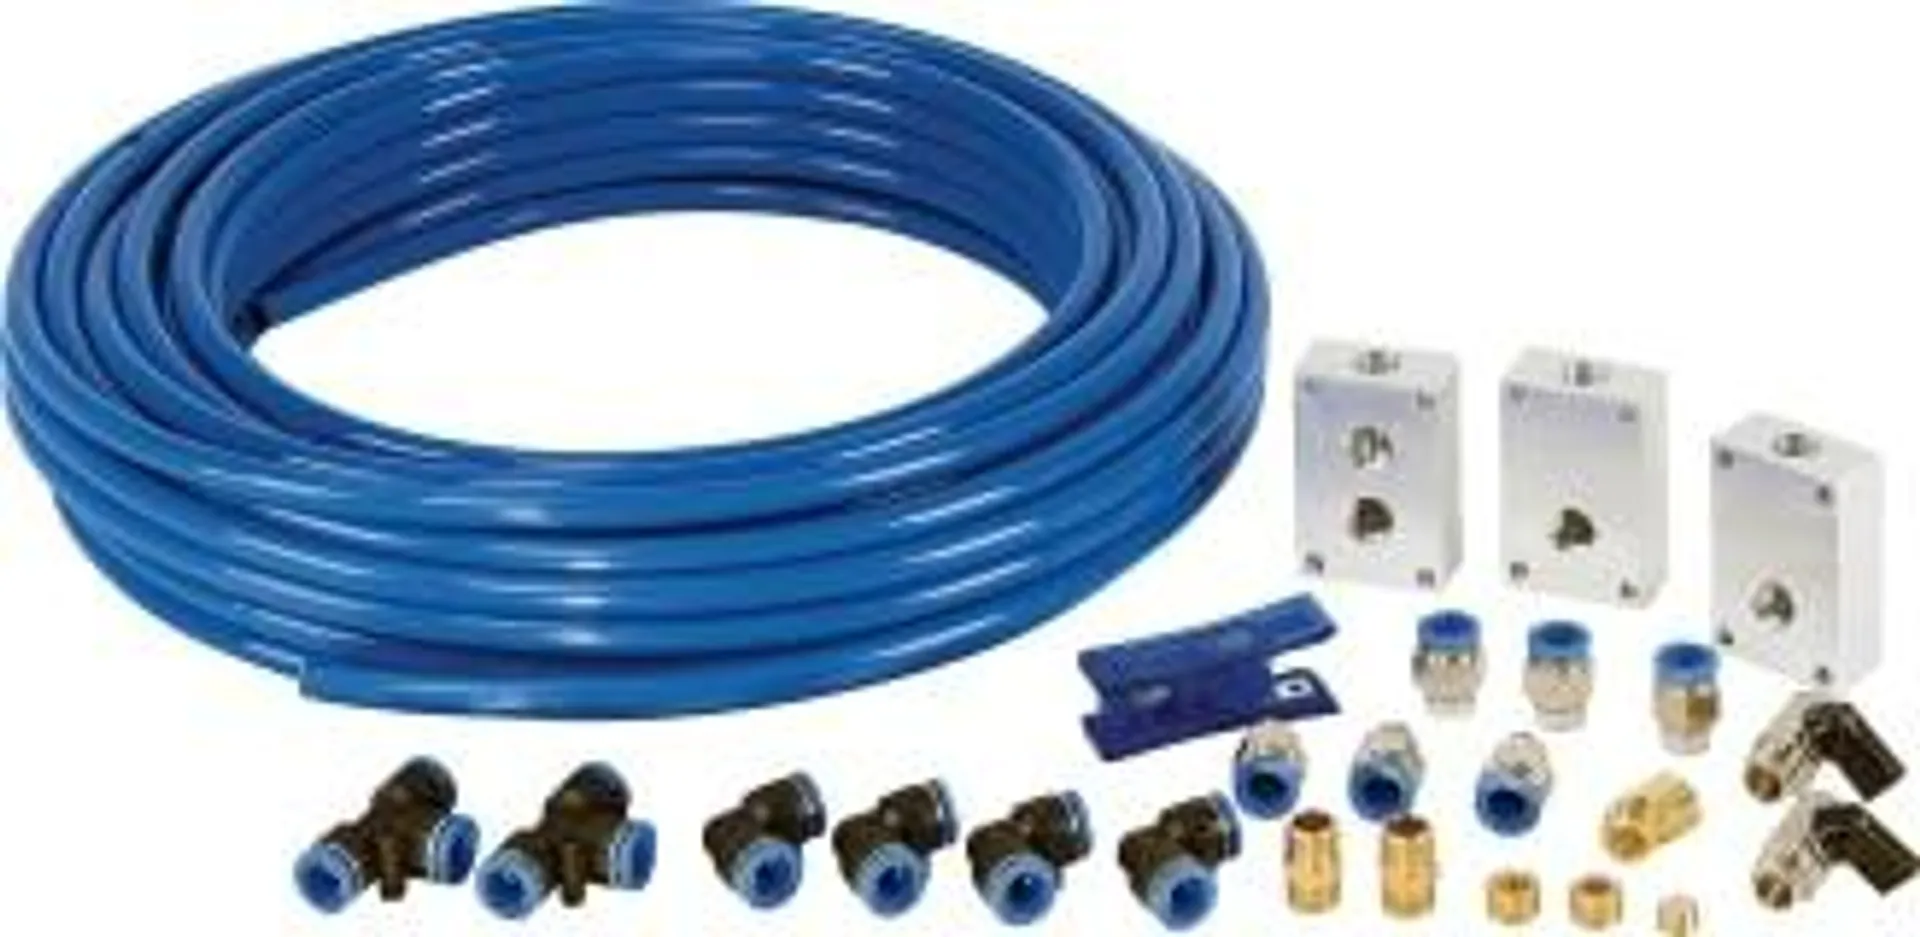 25 pc 1/2 in. x 100 ft Air Line Delivery Kit